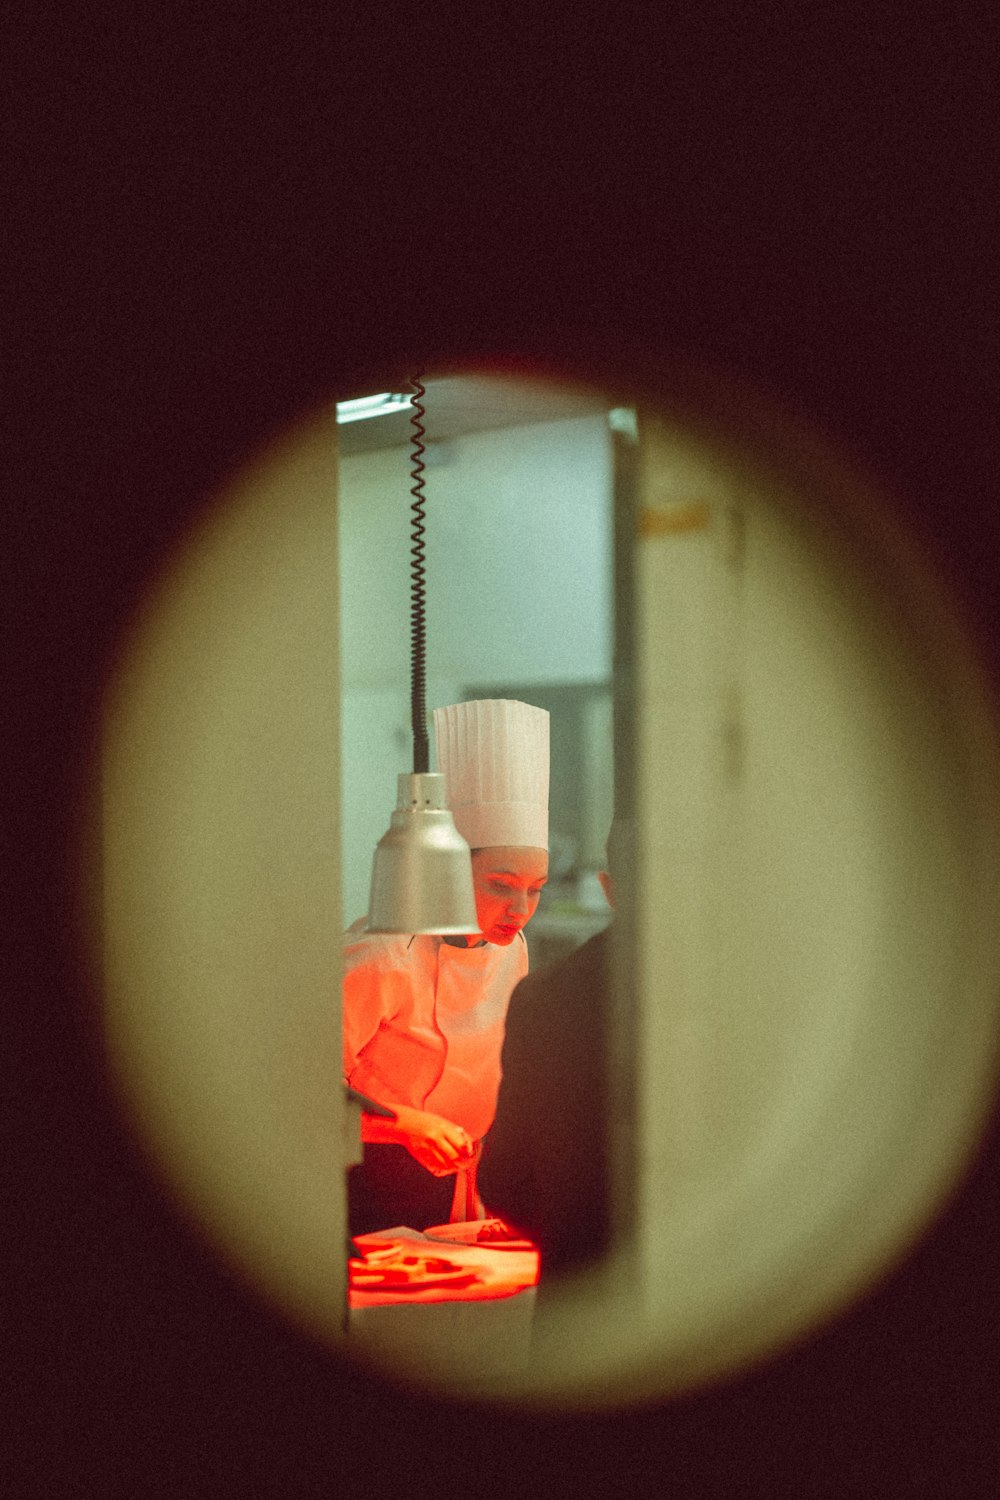 a view of a kitchen through a magnifying glass